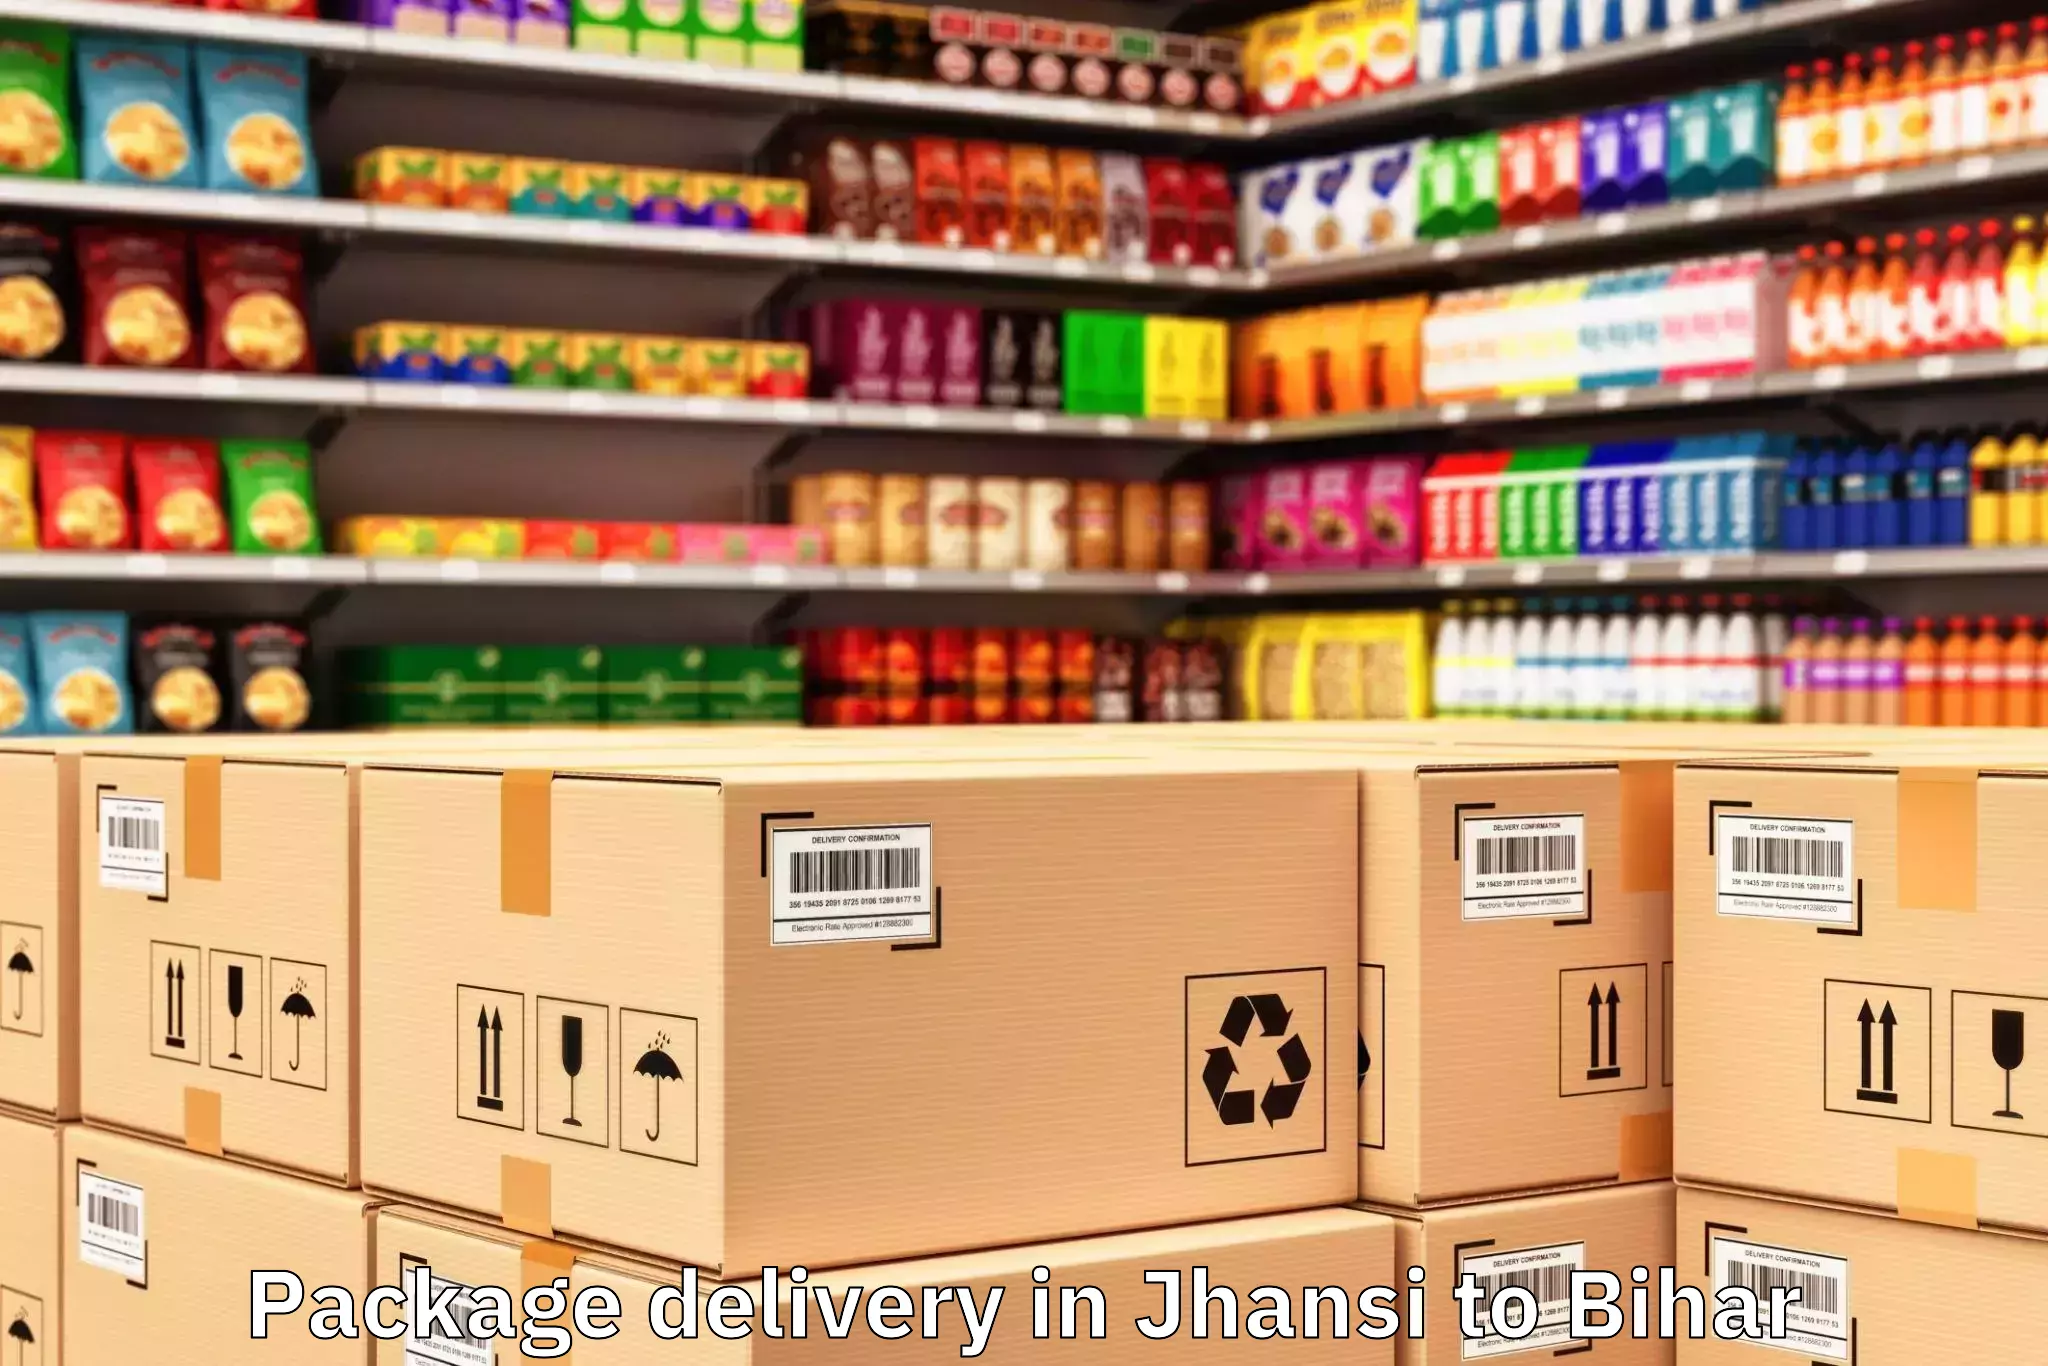 Jhansi to Bettiah Package Delivery